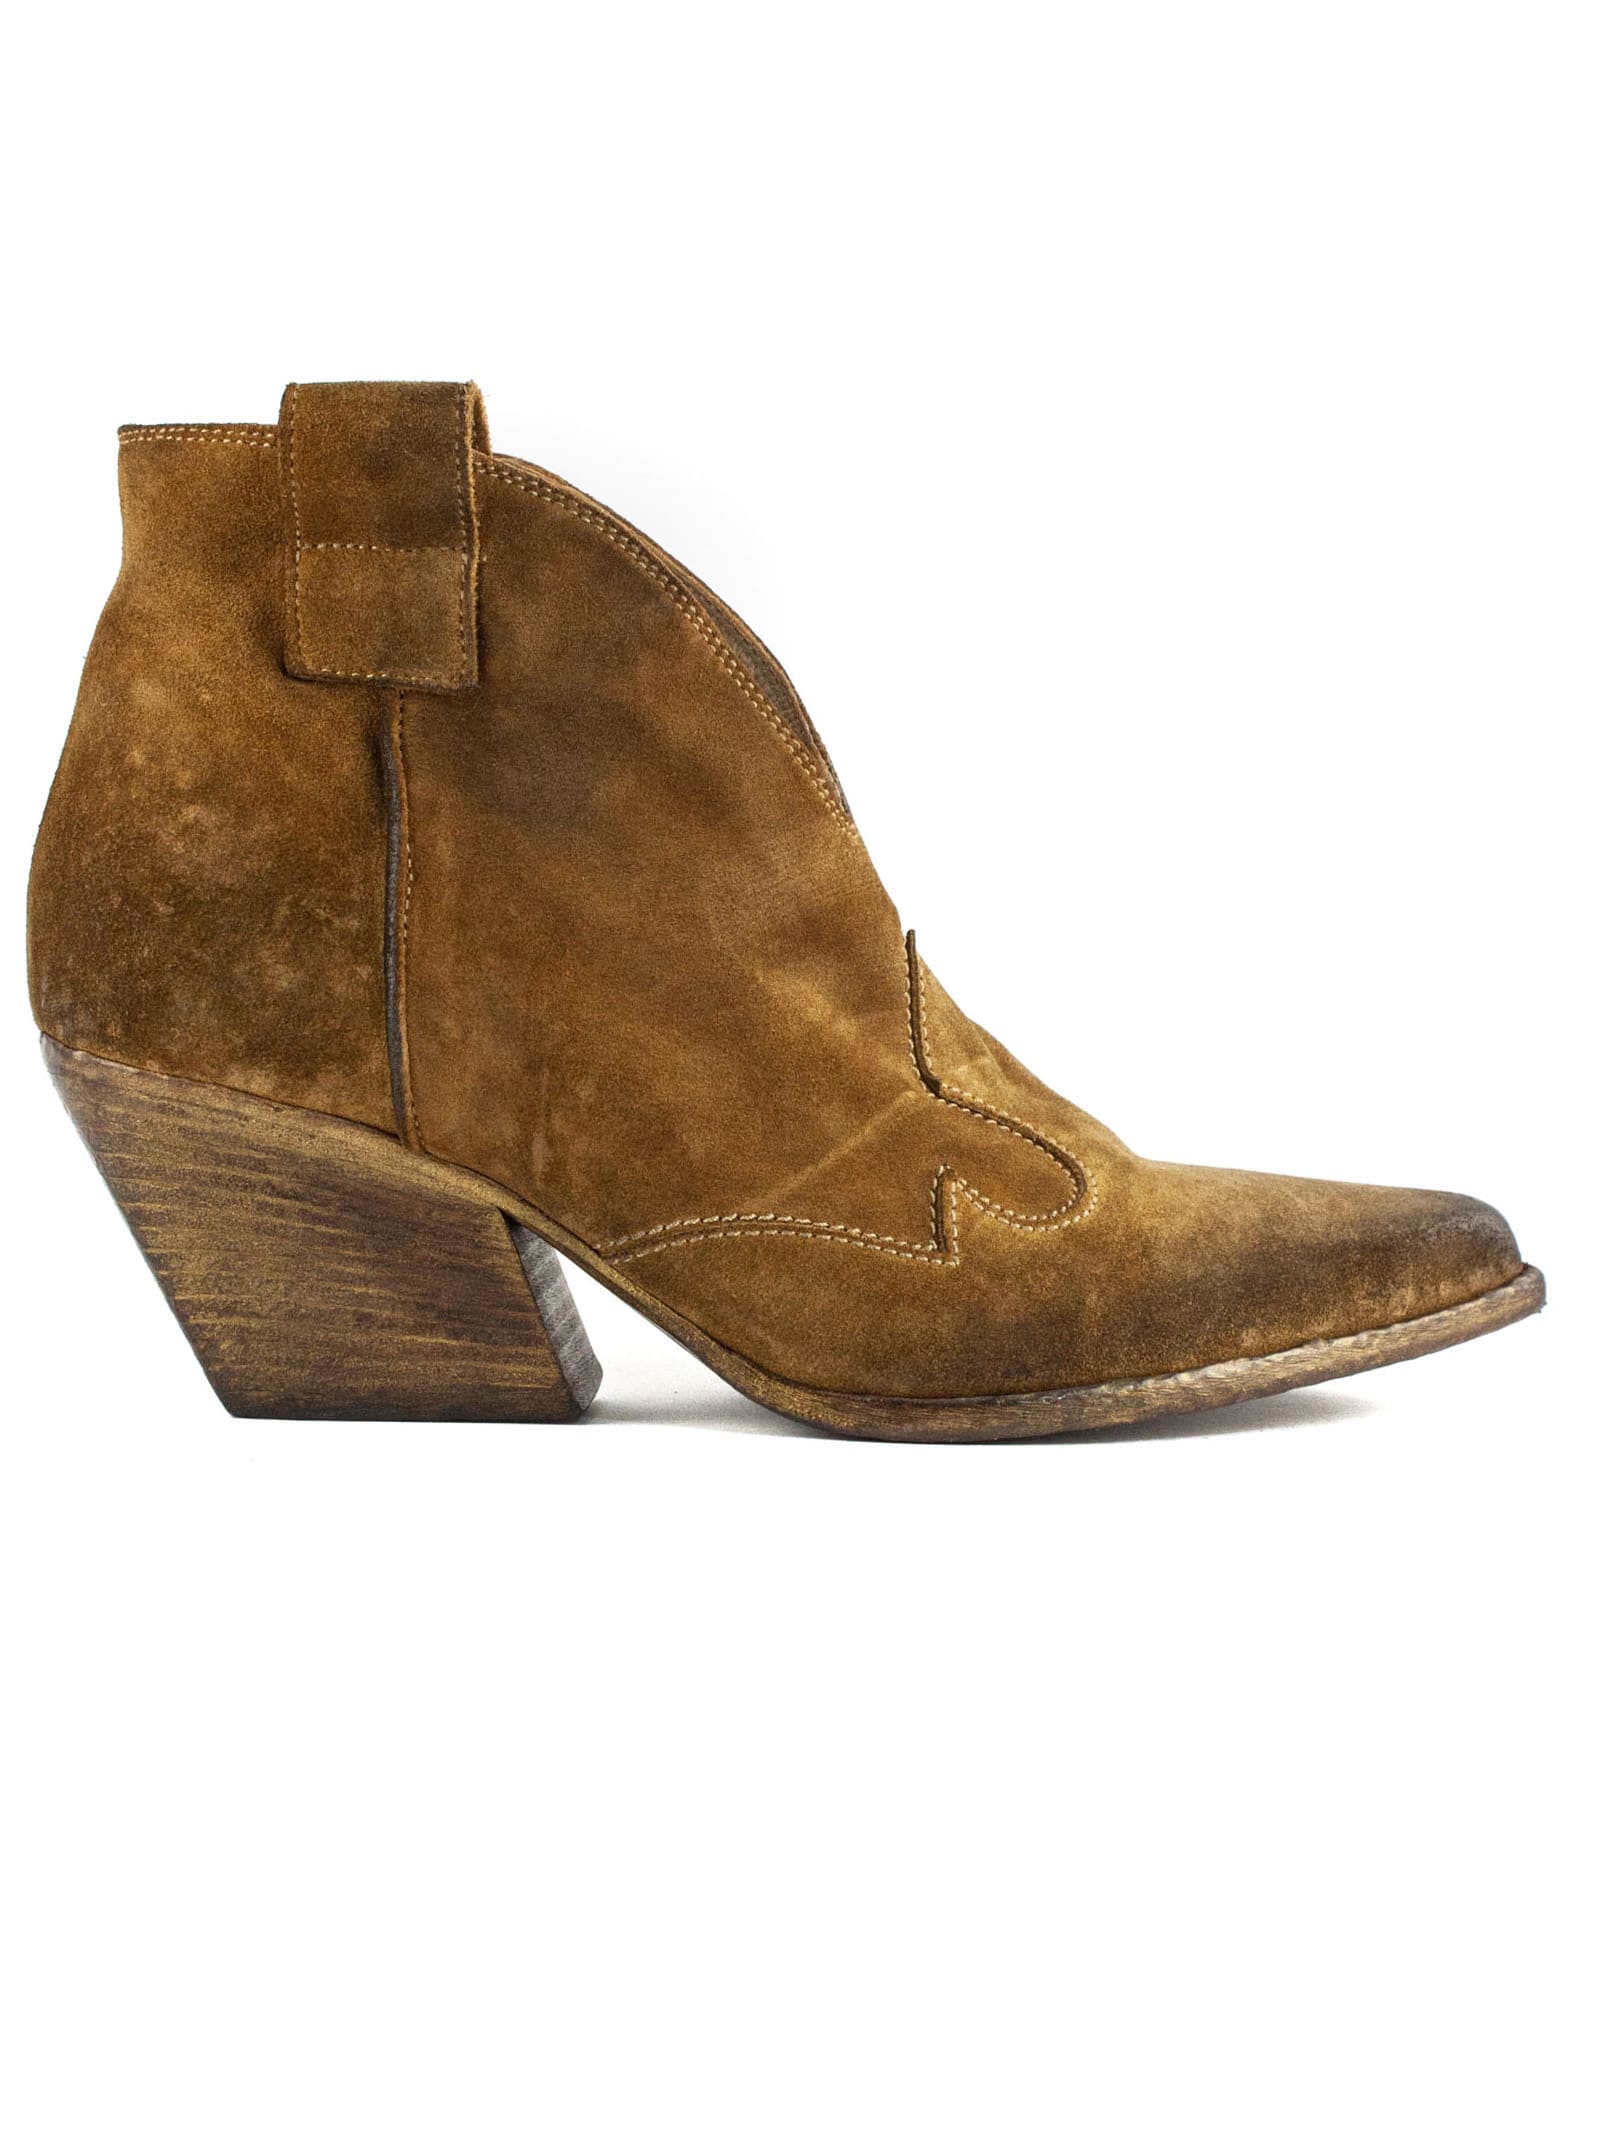 Elena Iachi Brown Suede Ankle Boot